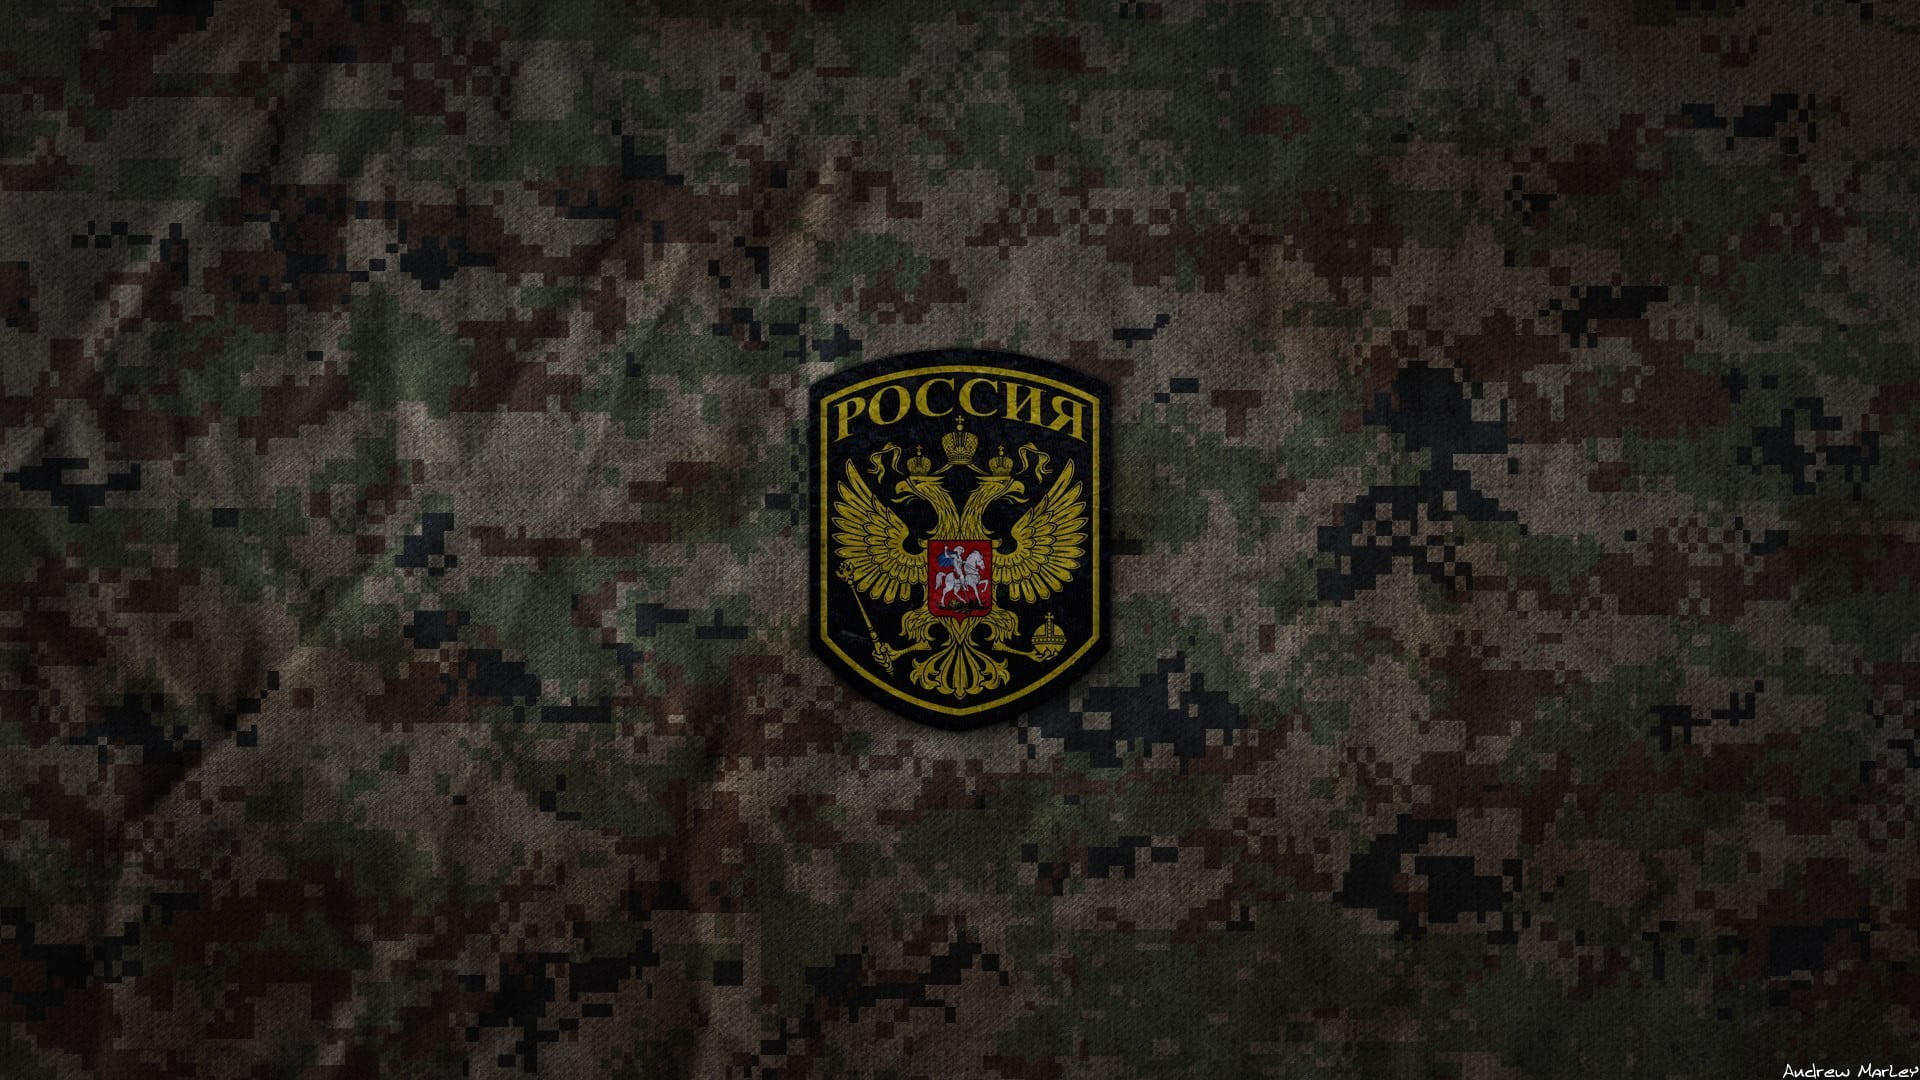 Poccnr patch, army, Russian Army, camouflage, military